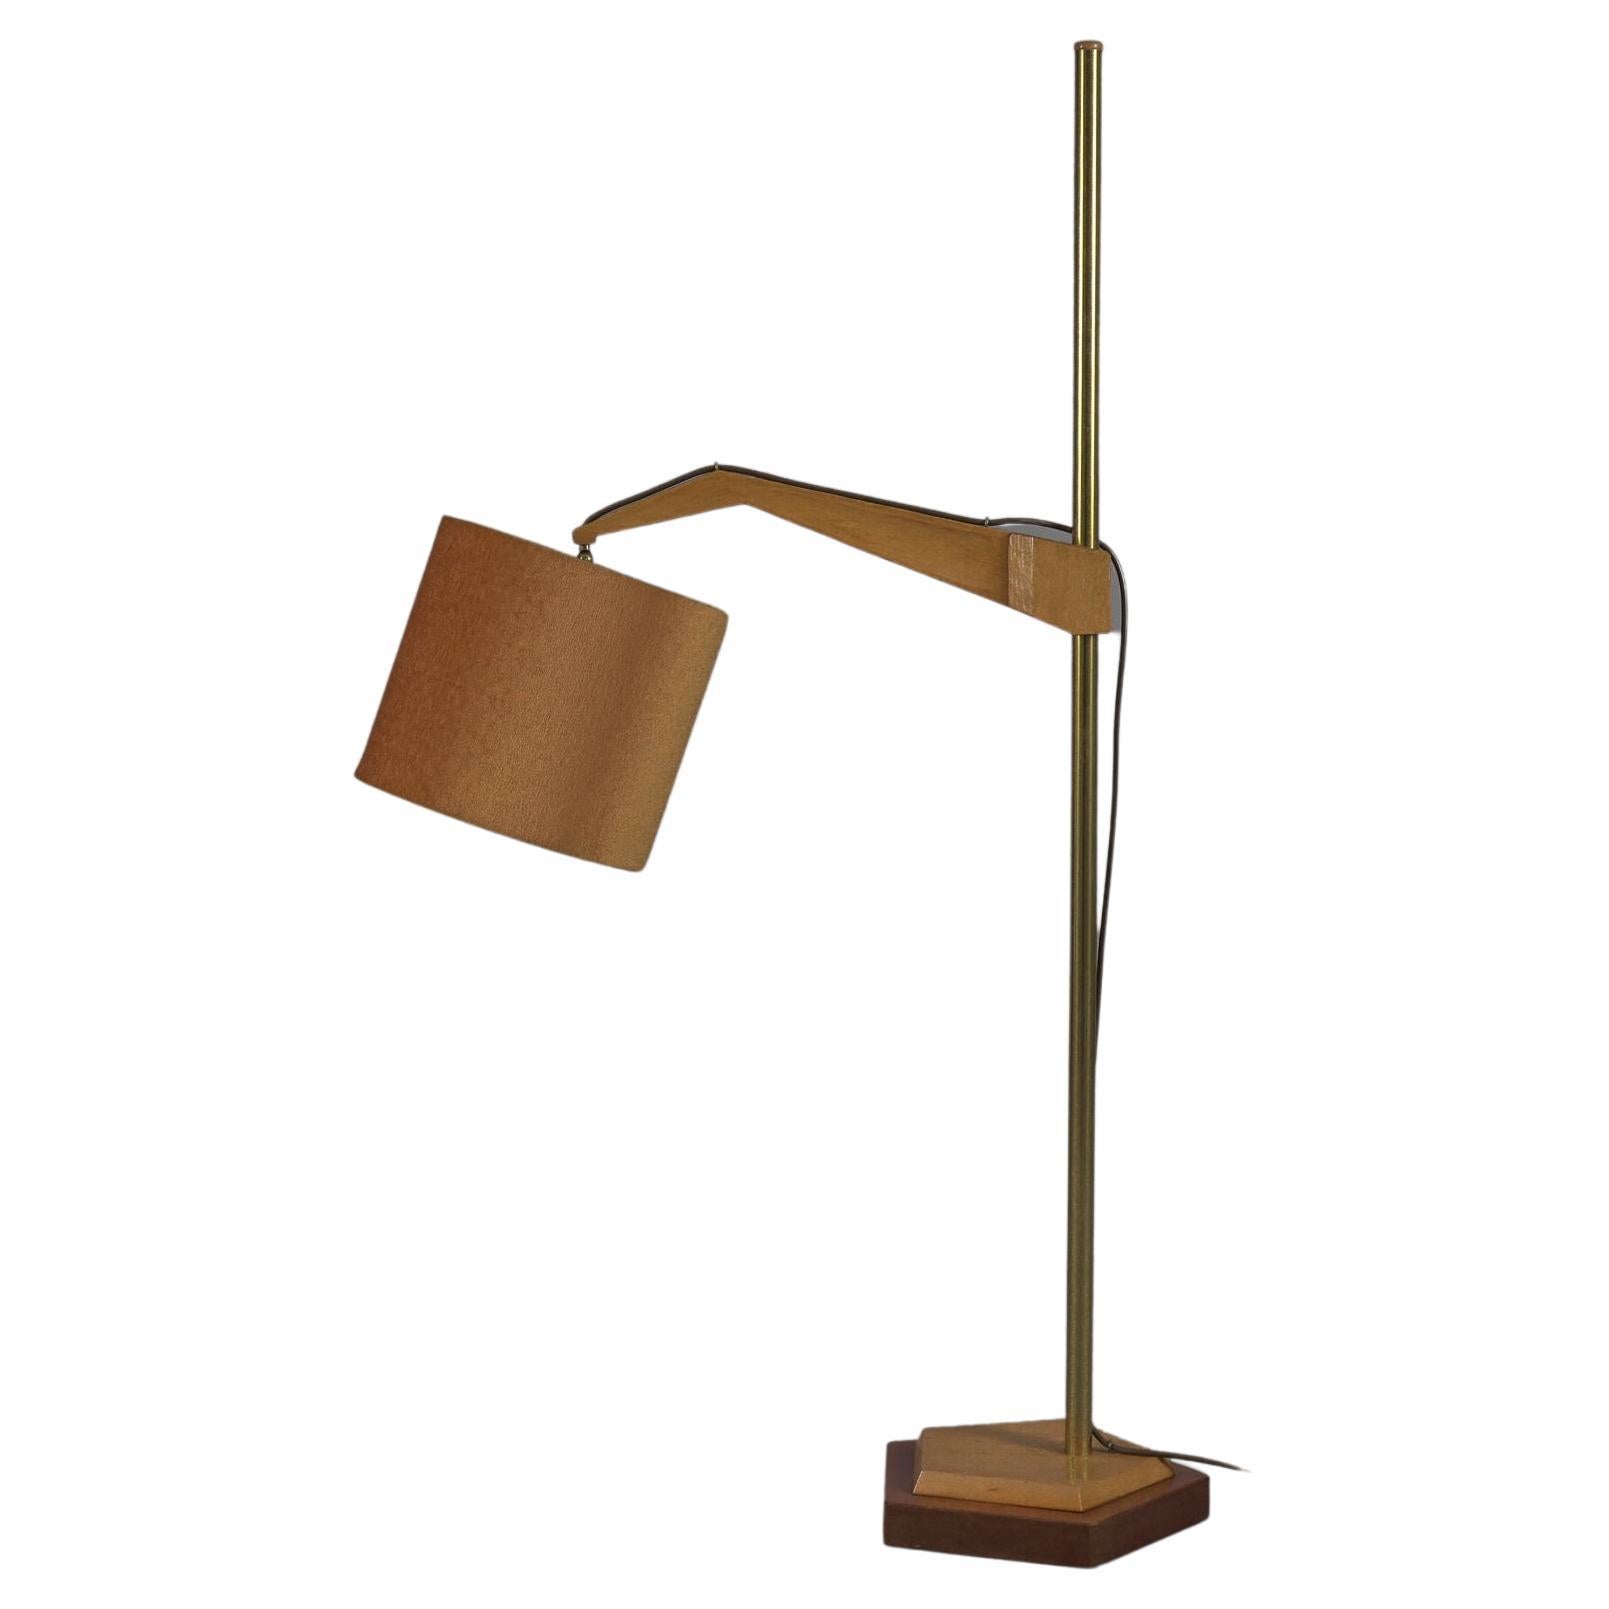 Unique anthroposophic floor lamp in wood, brass and fabric by Rudolf Dörfler